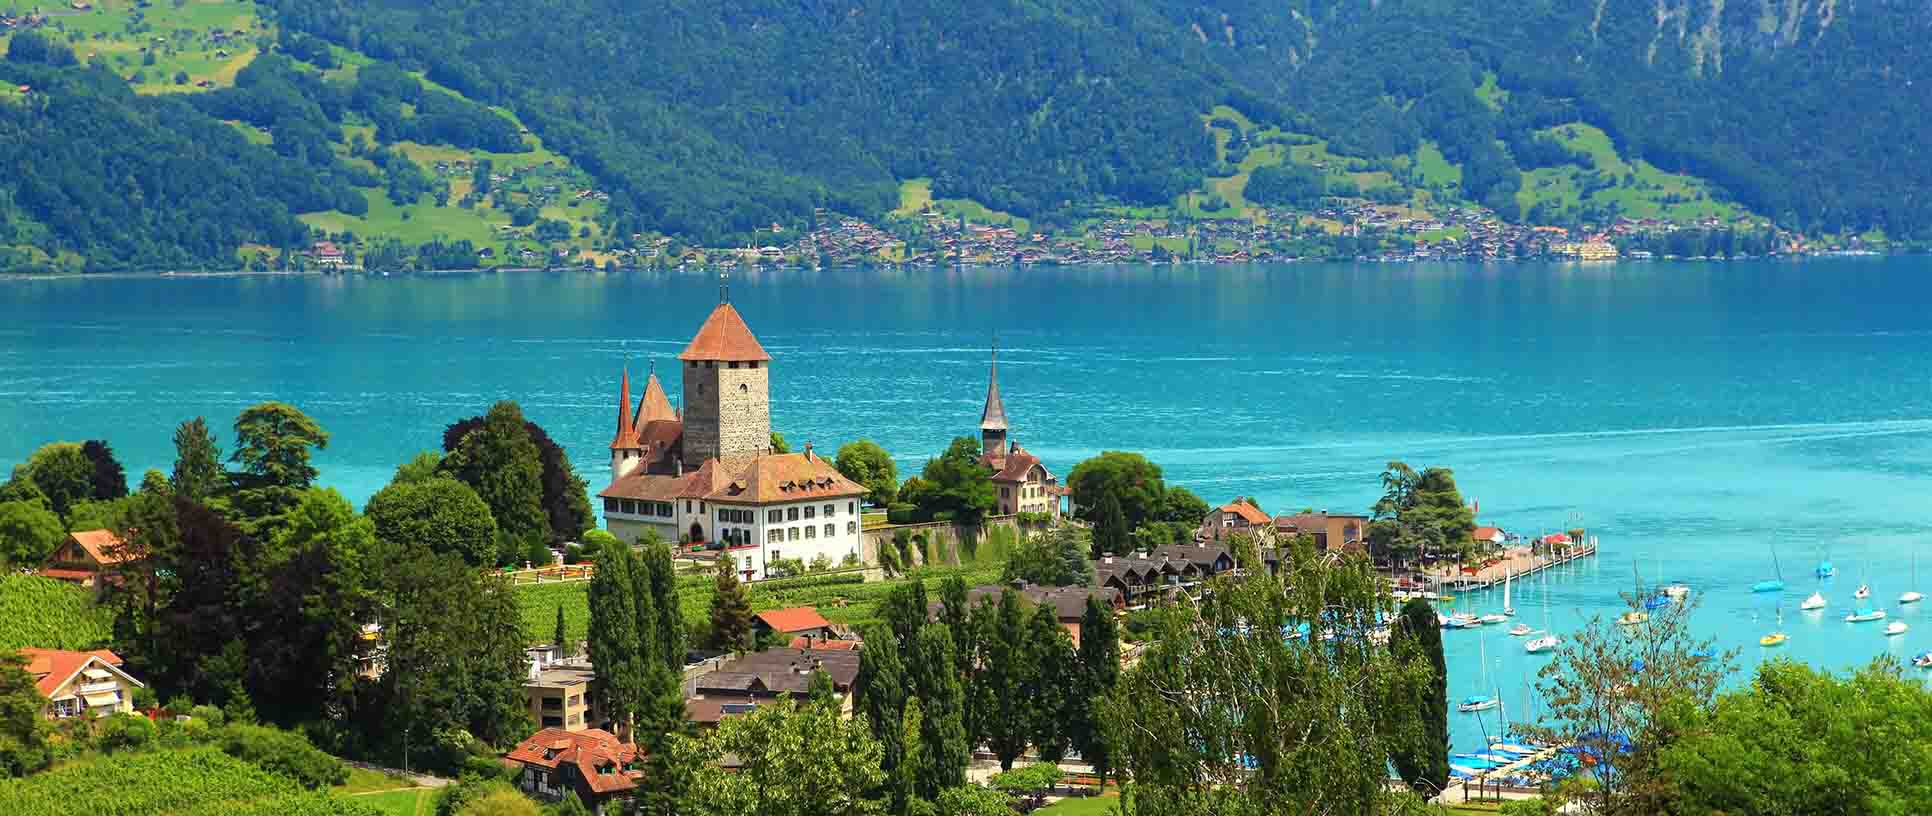 Scenic view of a serene lake surrounded by majestic greenery and traditional Swiss buildings.